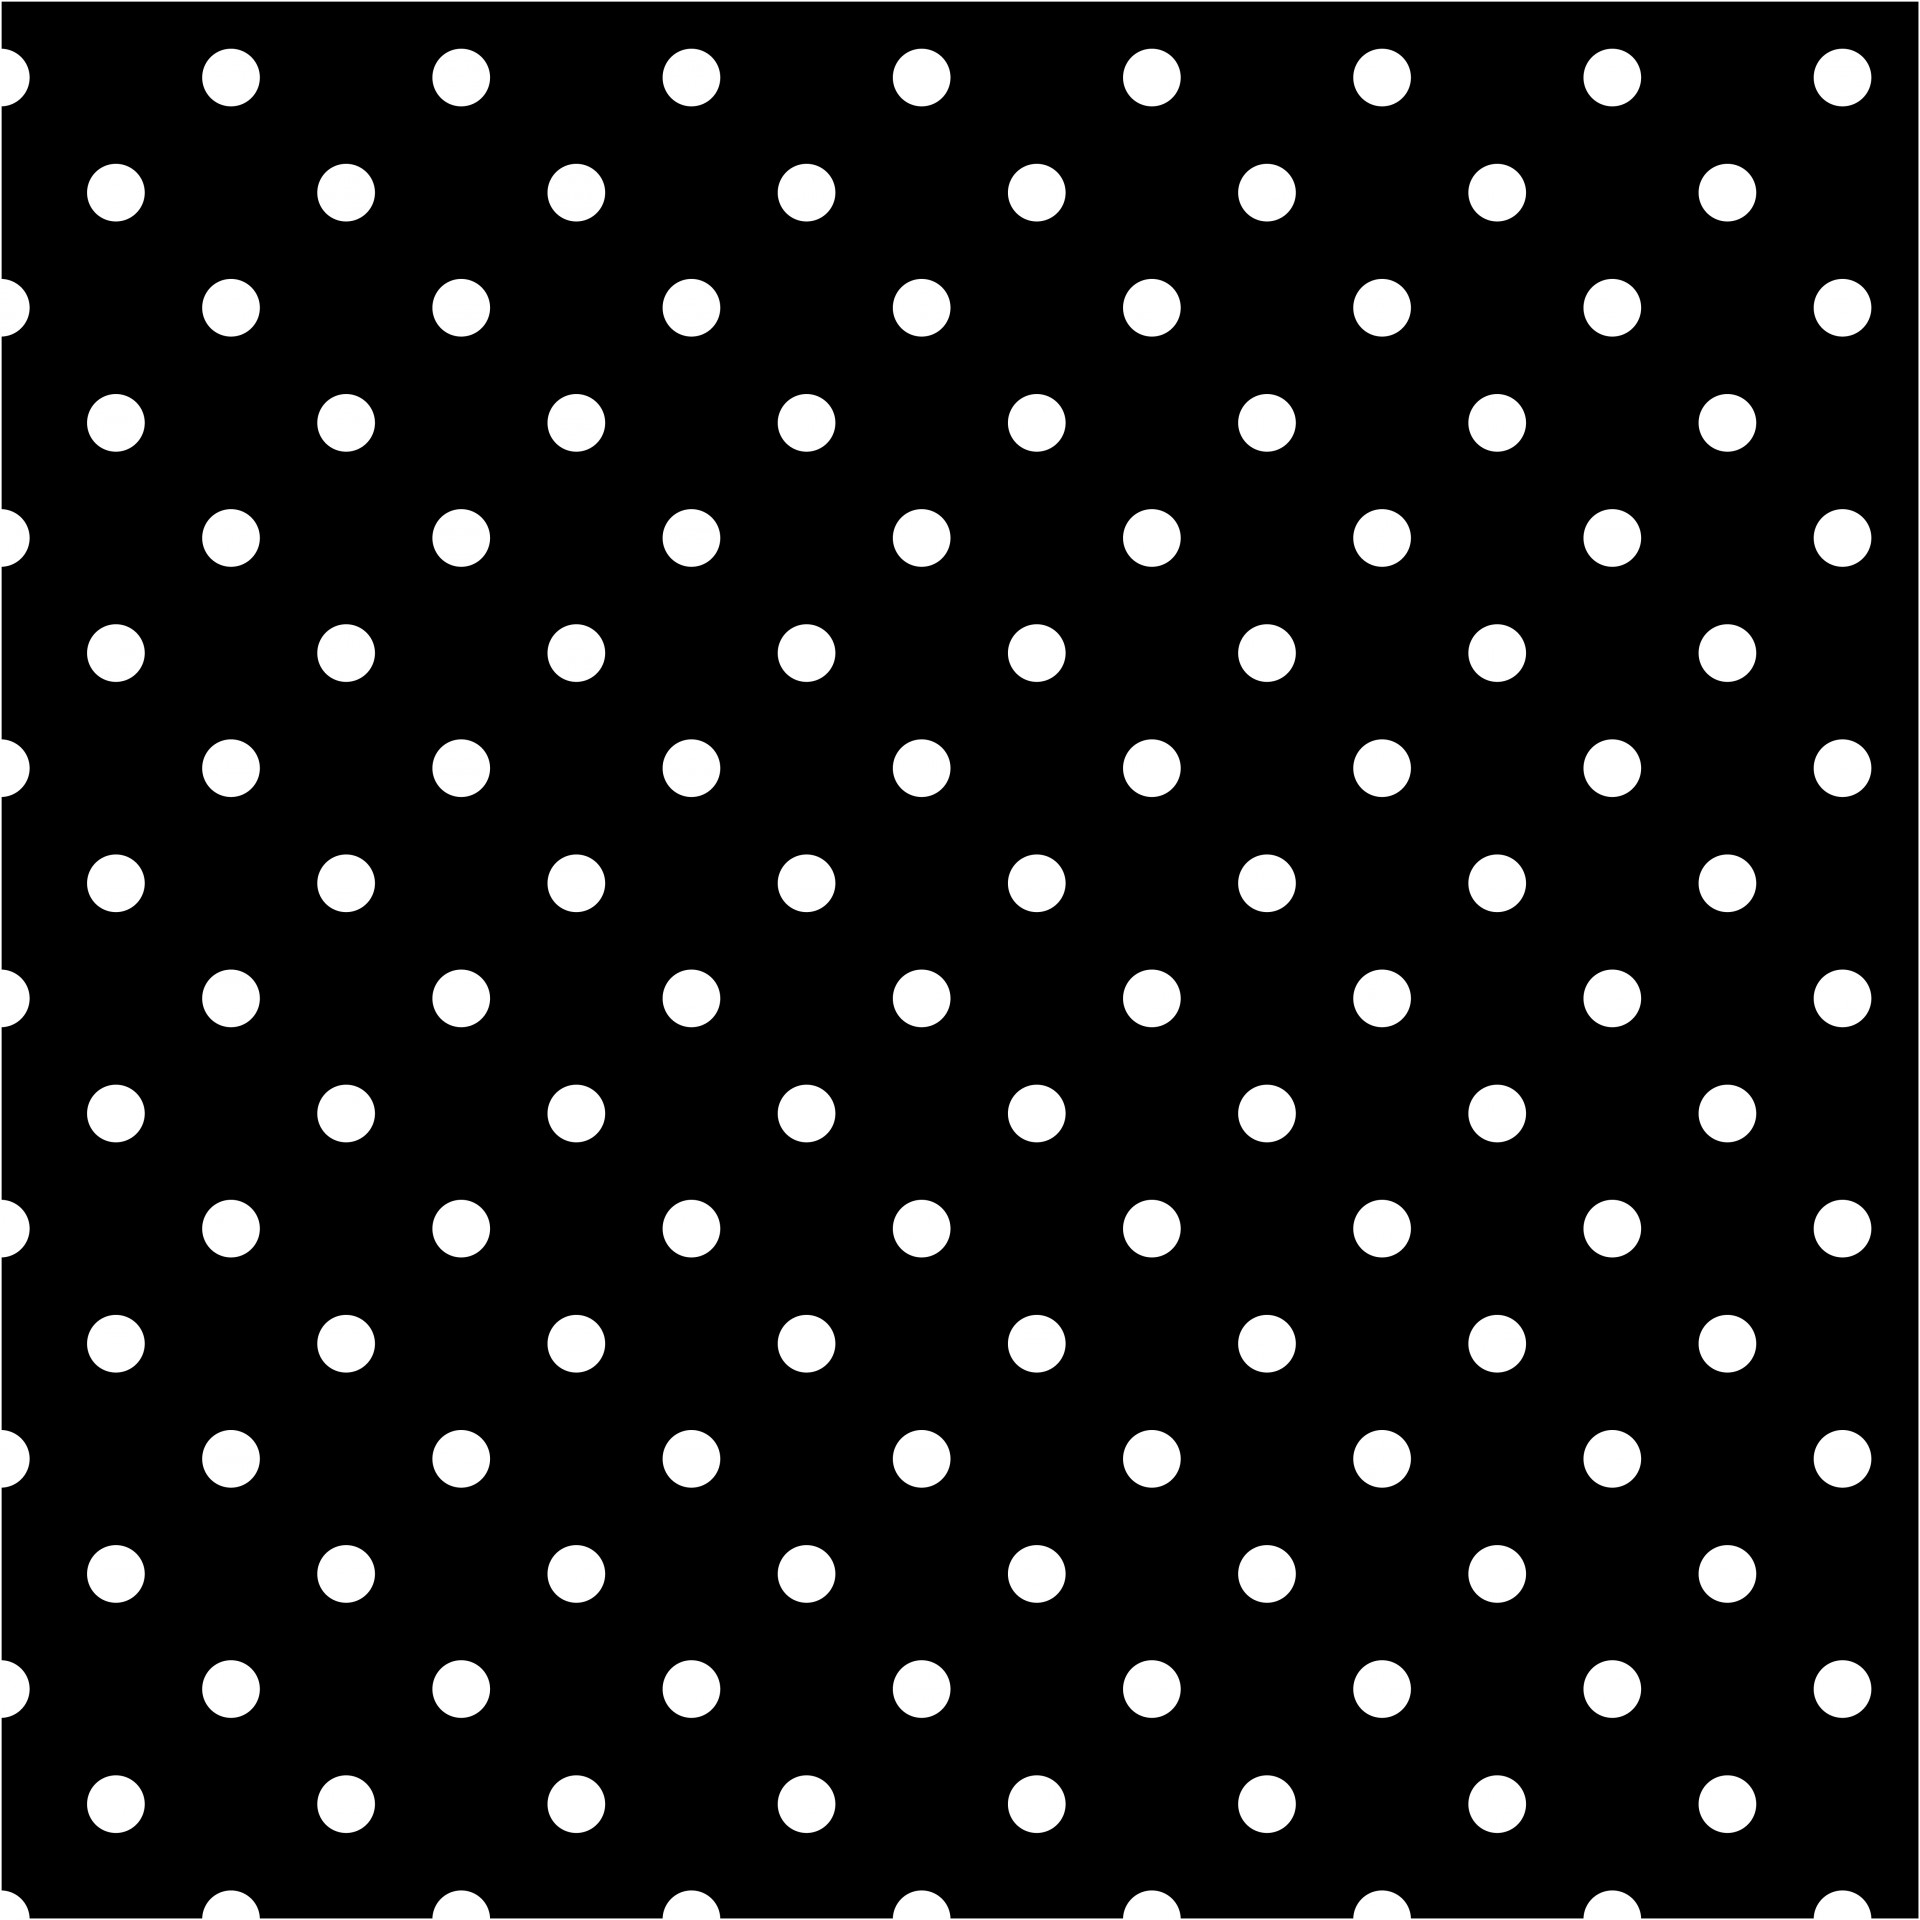 White polka dots on black background for scrapbooking